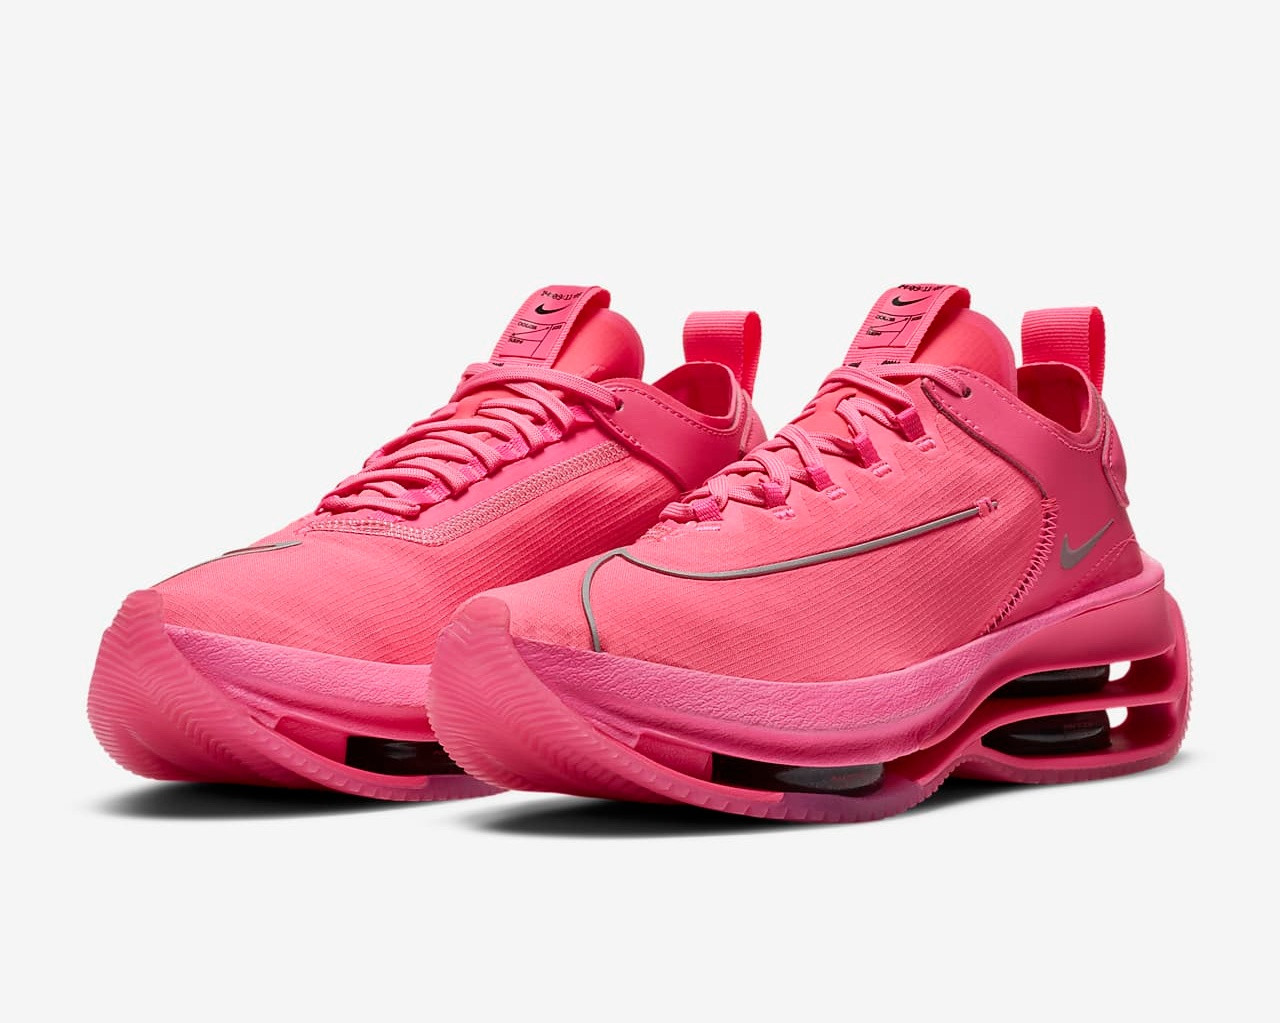 Nike Zoom Double Stacked Pink Blast Black Shoes CZ2909 